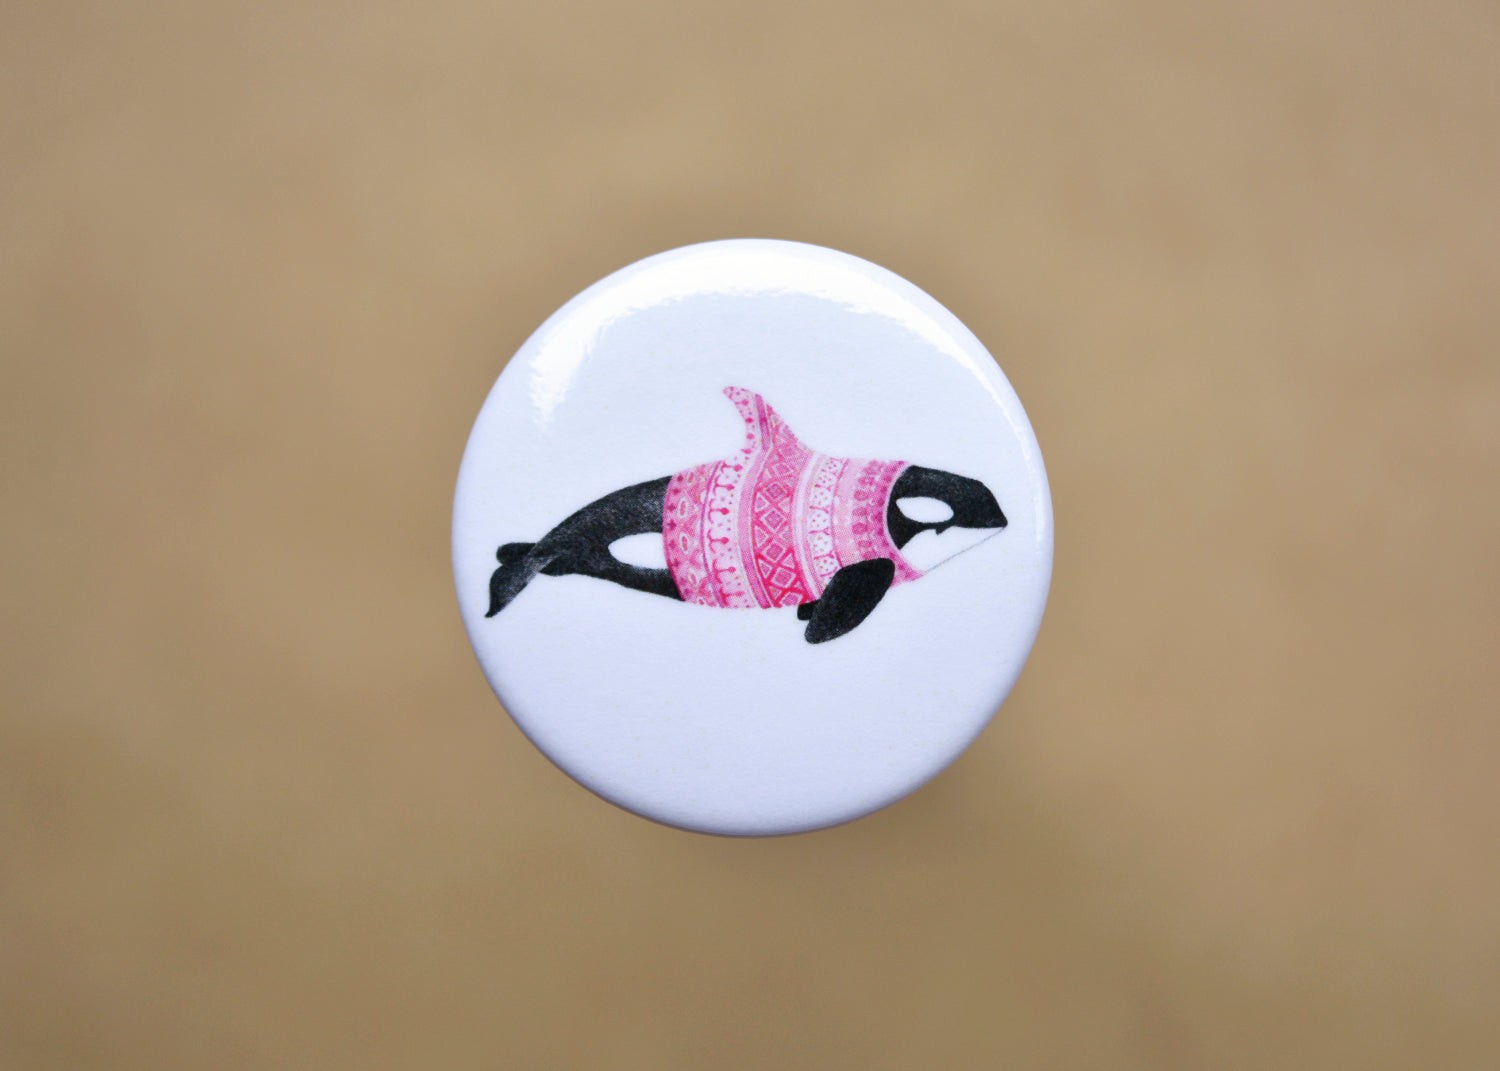 Ink drawing of a humpback whale wearing a pink sweater on a pin-backed button.